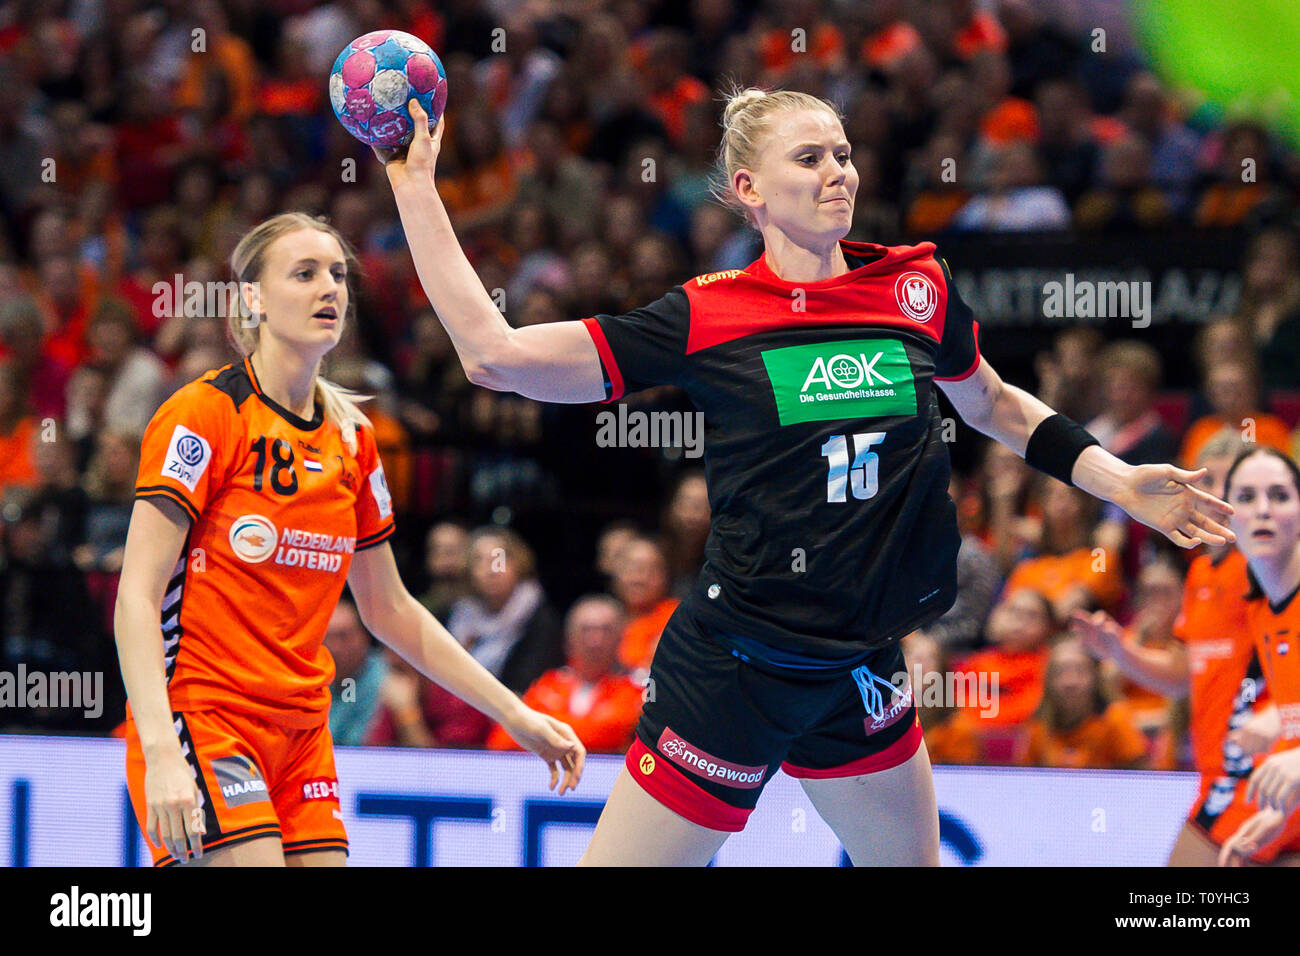 Groningen, Netherlands. 22nd Mar, 2019. Handball, women: International, Netherlands - Germany: Kim Naidzinavicius (r) from Germany in action against Kelly Dulfer from the Netherlands. Credit: Marco Wolf/wolf-sportfoto/dpa/Alamy Live News Stock Photo